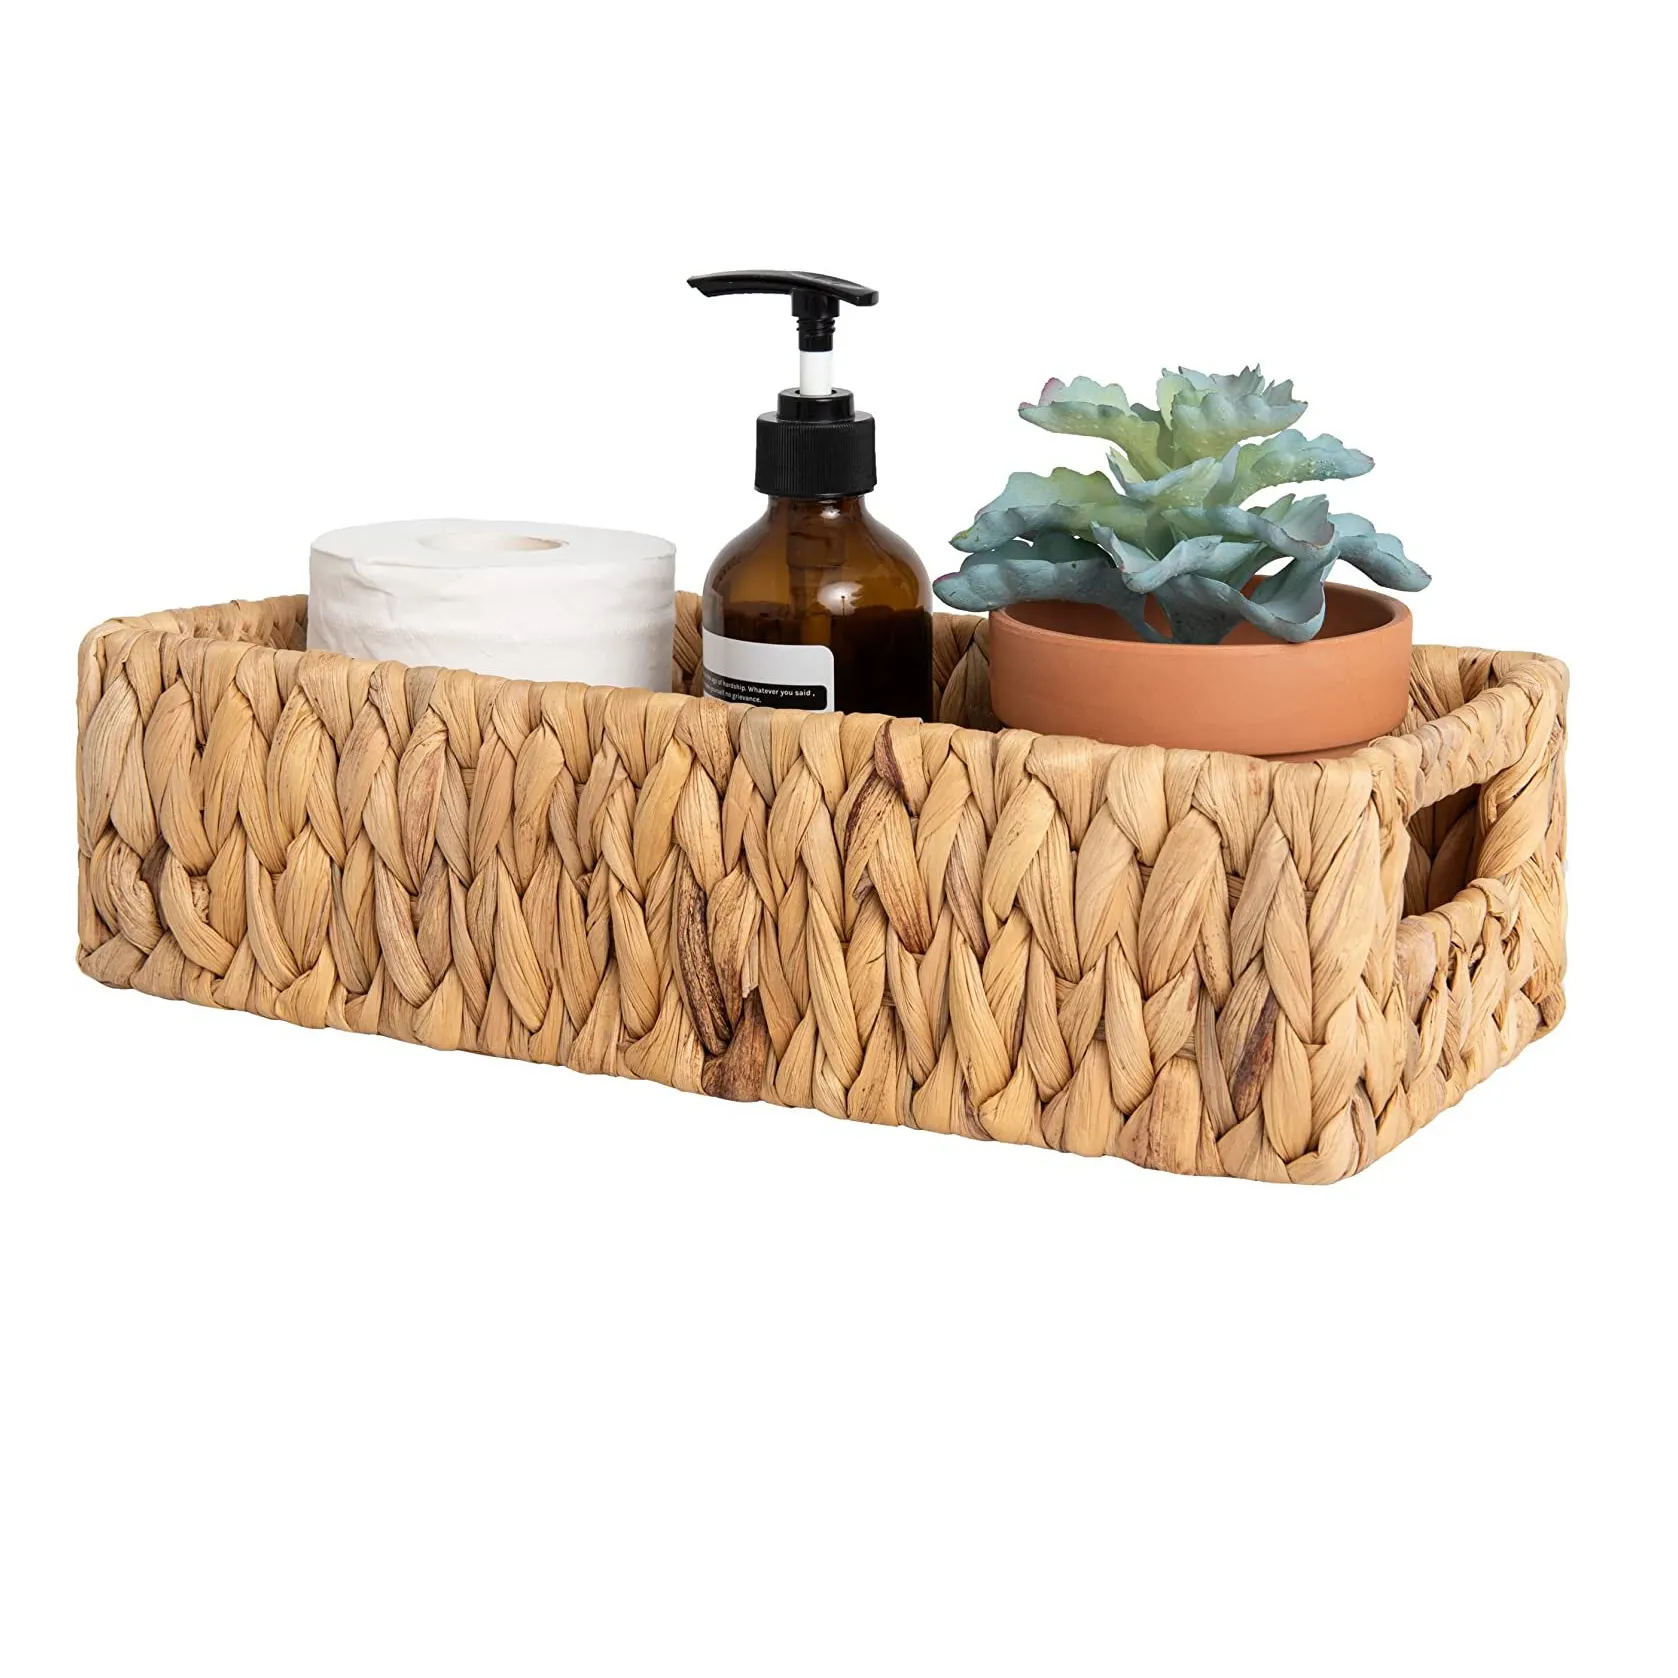 Direct selling rectangle hand-woven Water Hyacinth Wicker Storage rattan Baskets for sundries